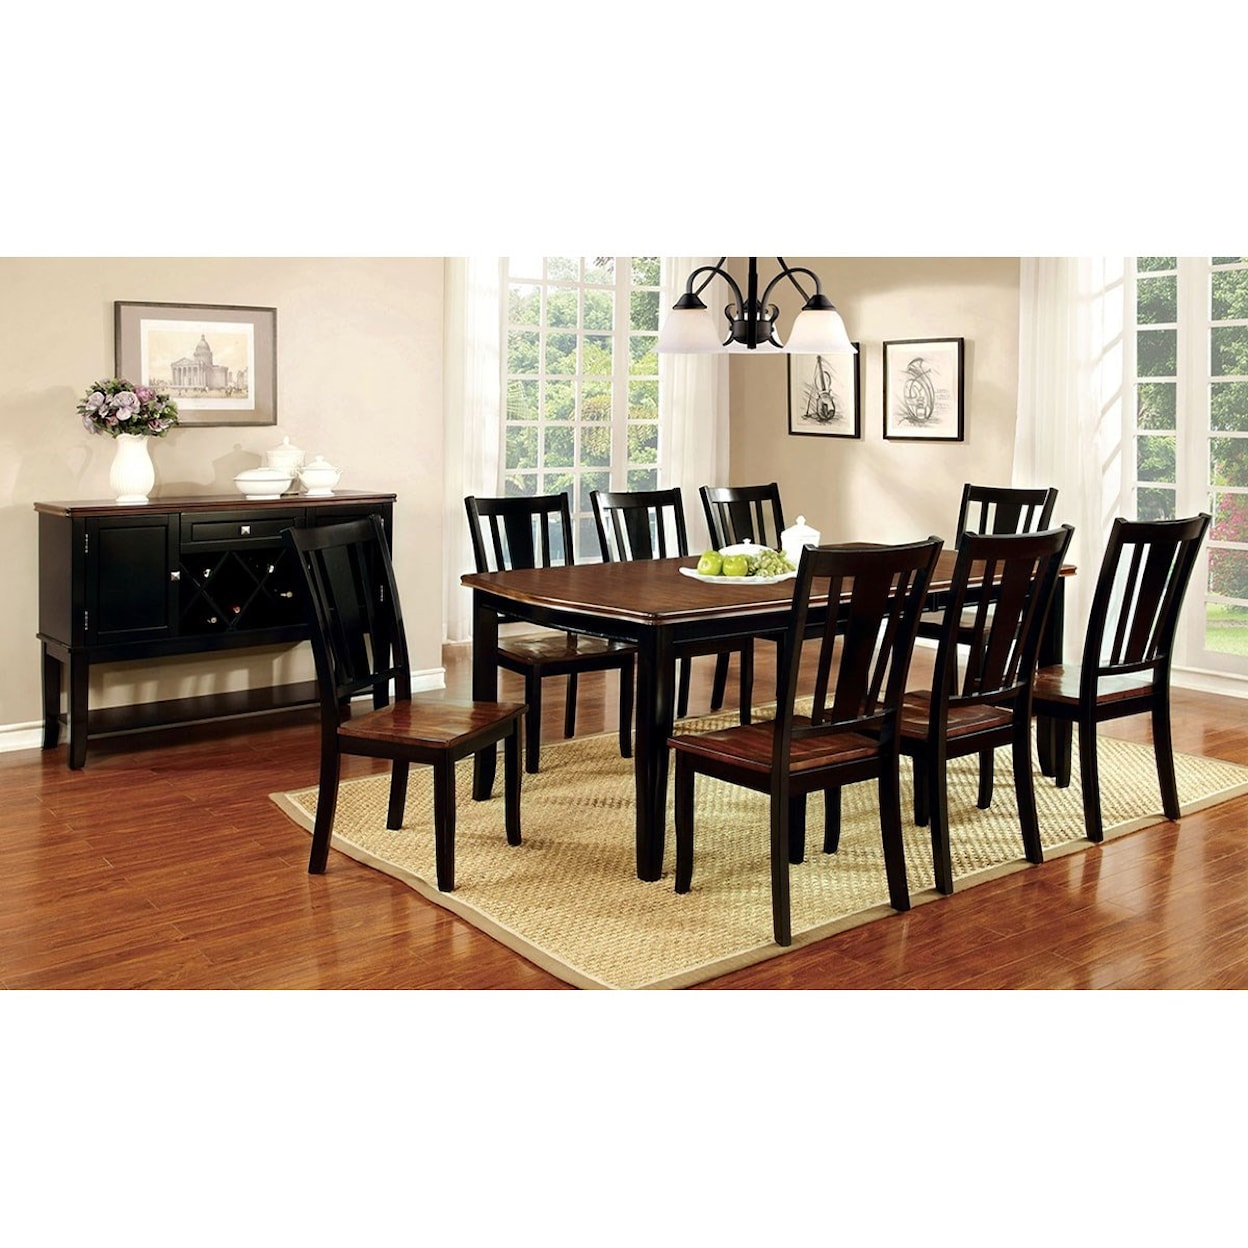 Furniture of America Dover II 9 Pc Dining Set